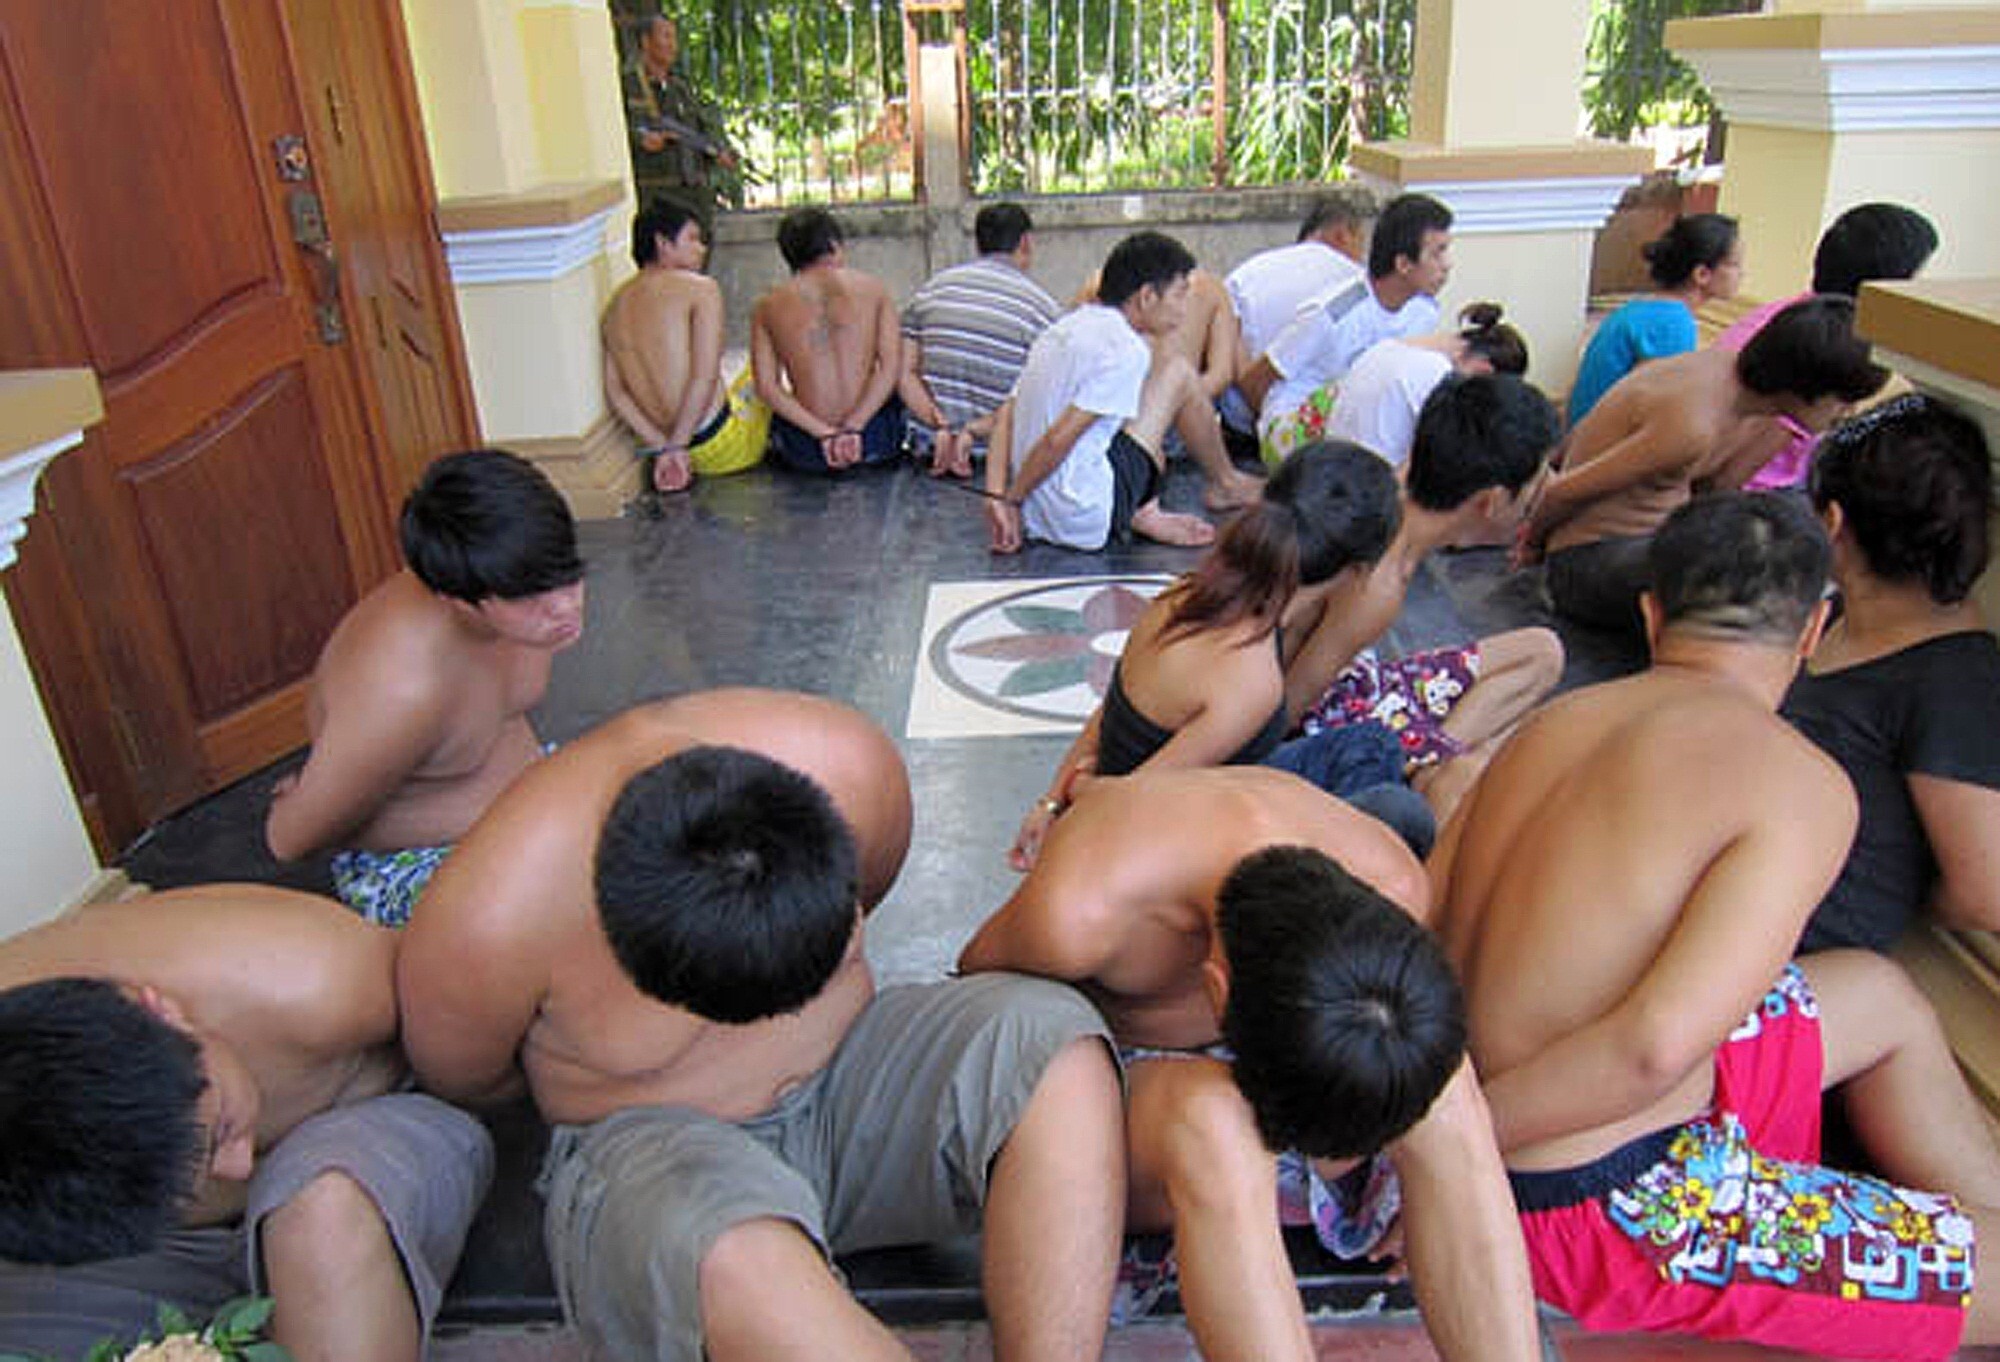 Chinese nationals sit with their hands bound after being arrested by Cambodian police in 2011 on suspicion of extorting money from victims abroad. Photo: AFP